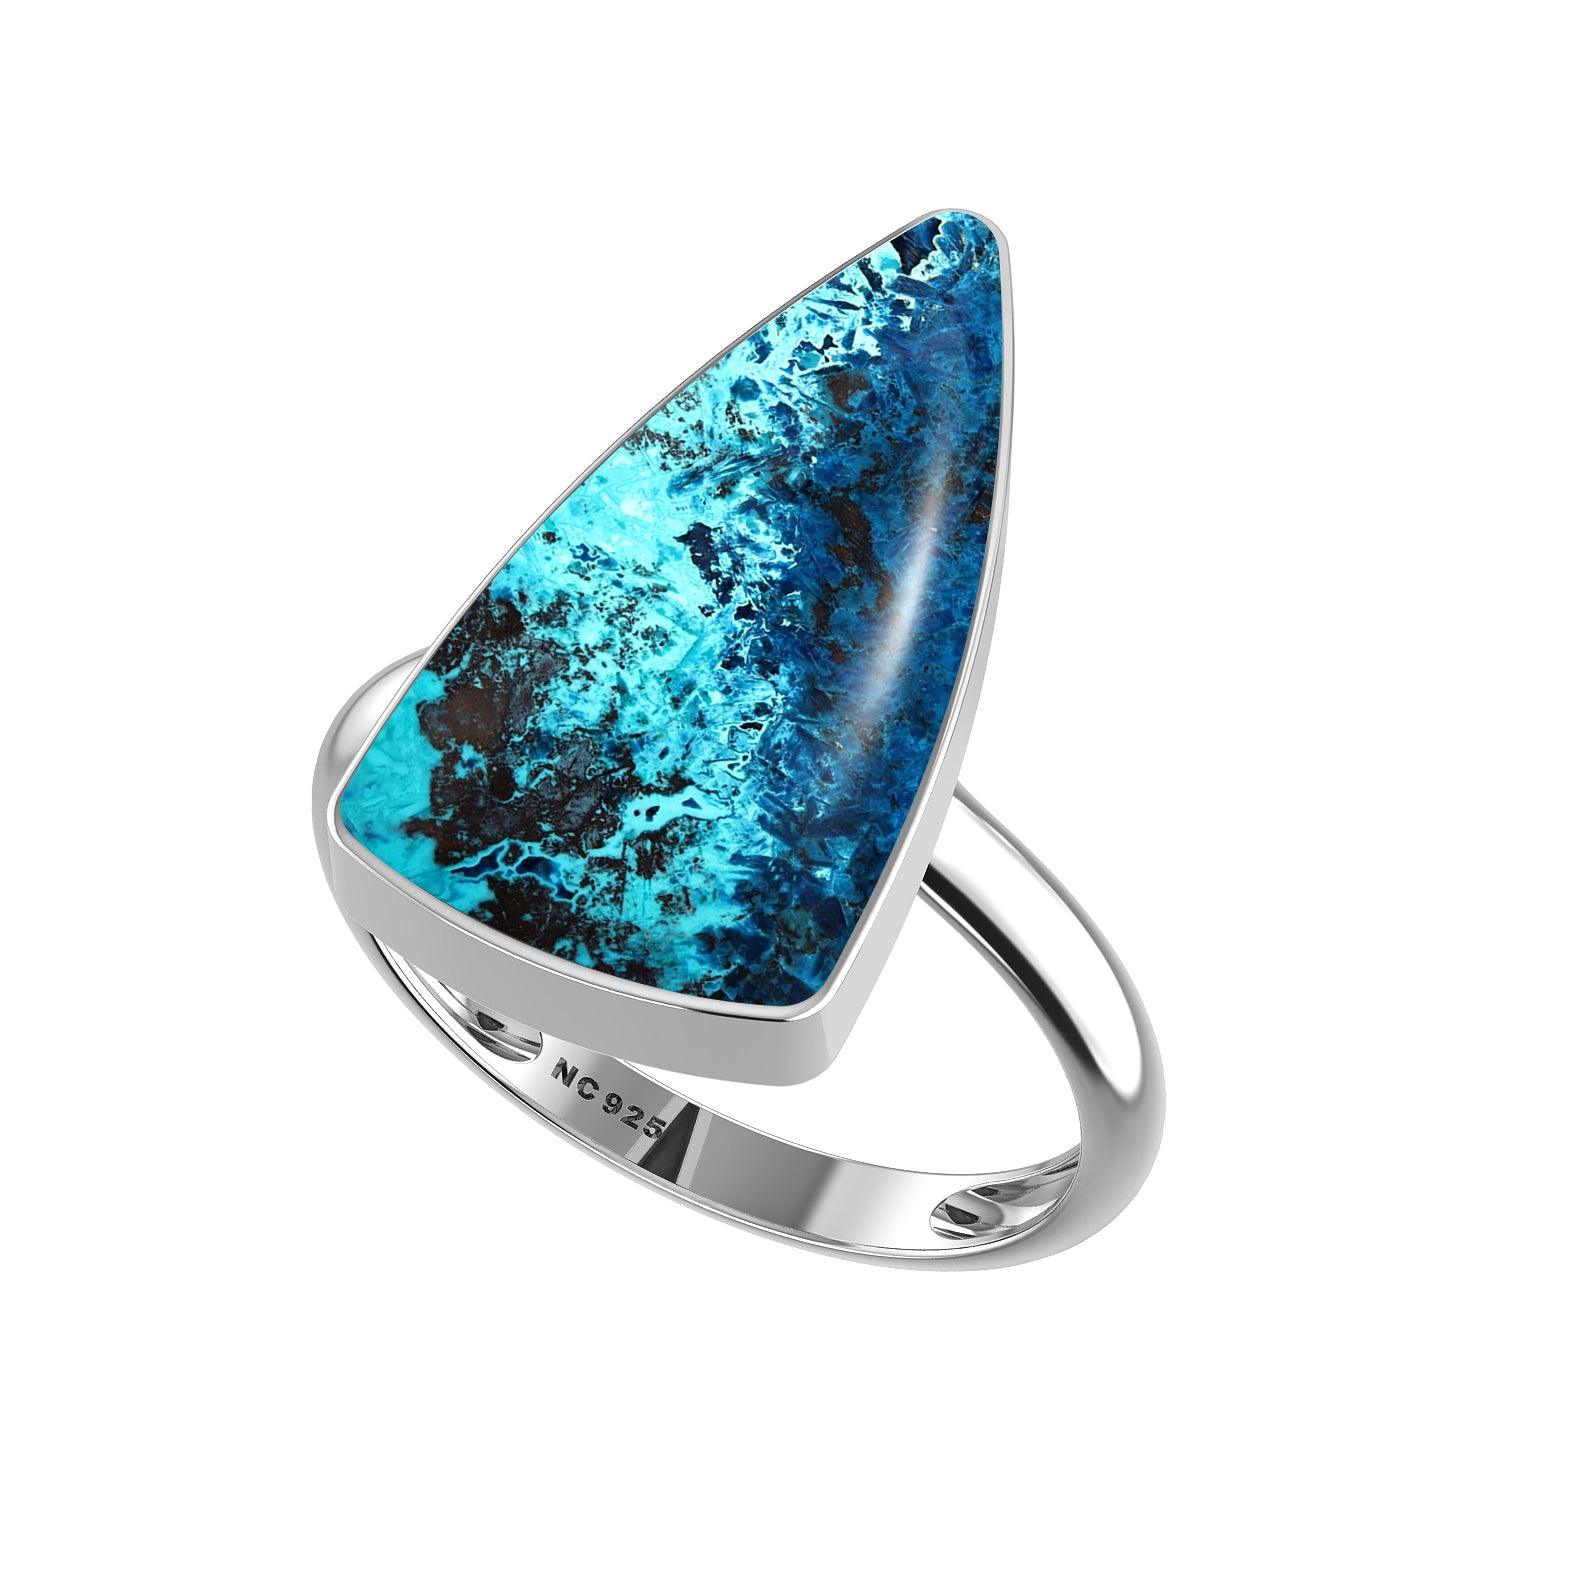 Natural Shattuckite Ring 925 Sterling Silver Bezel Set Jewelry Pack of 6 (Box 8)